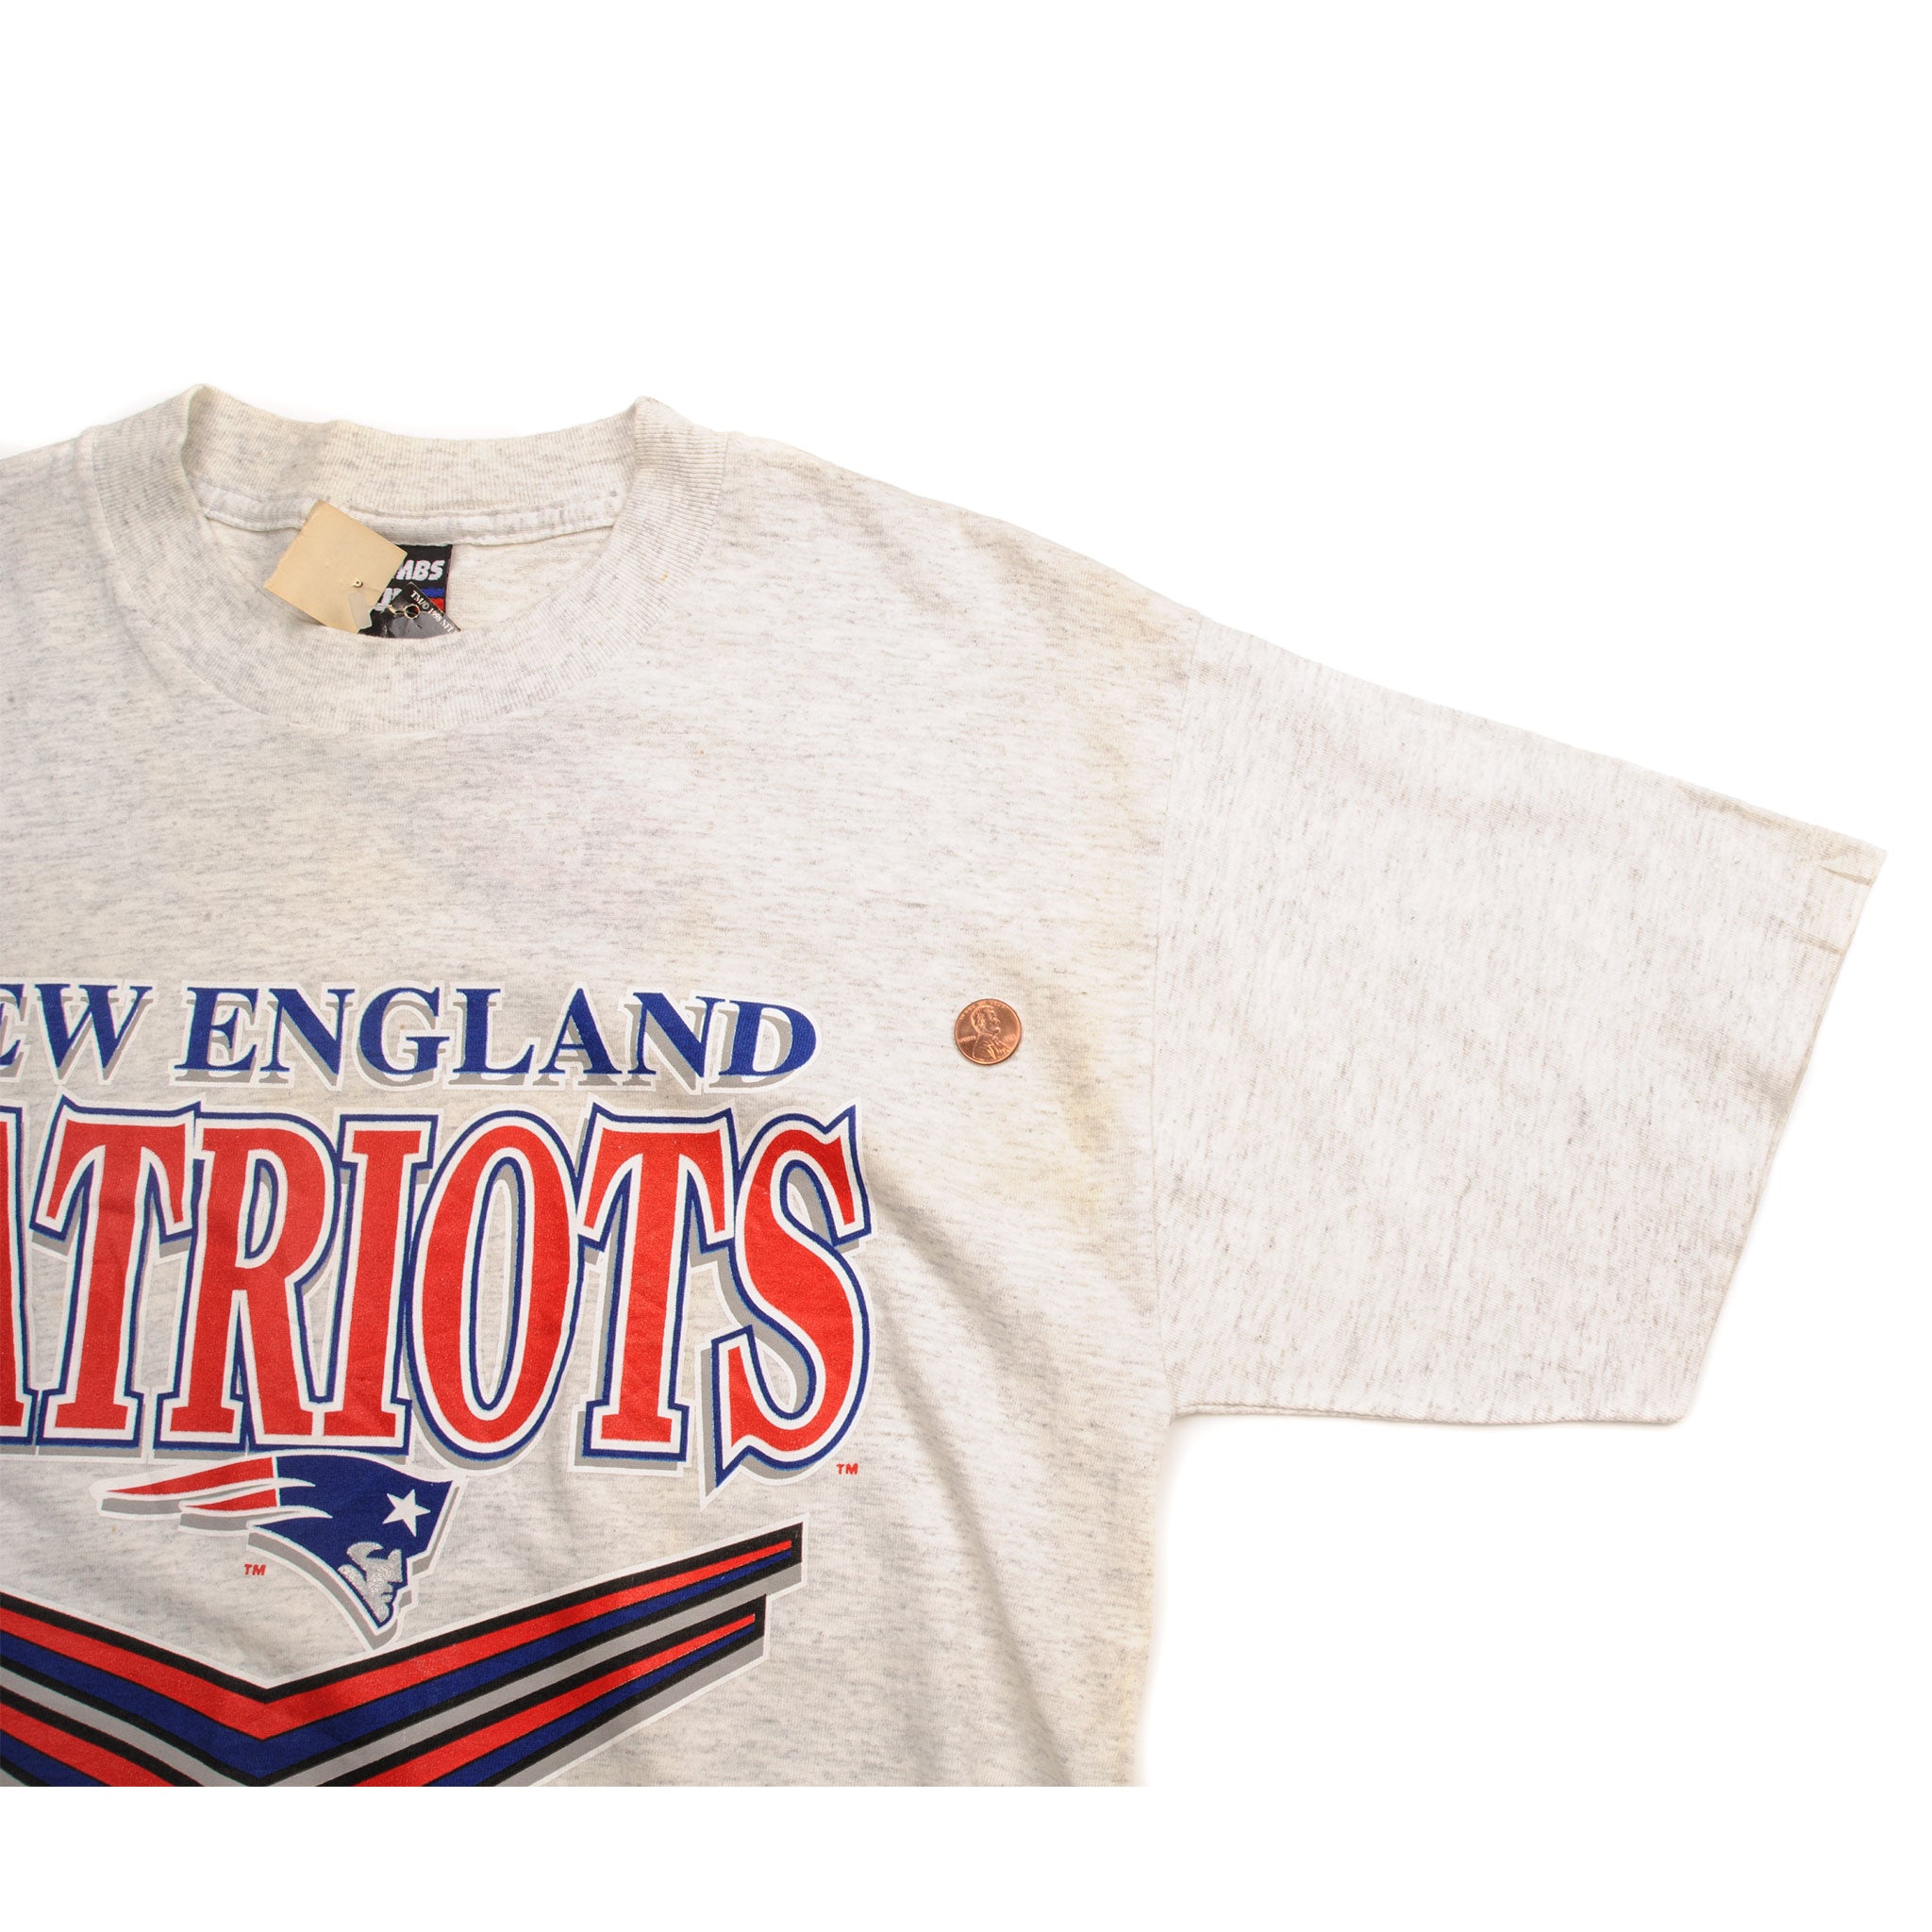 Sports / College Vintage NFL New England Patriots Tee Shirt 1986 Size Medium Made in USA